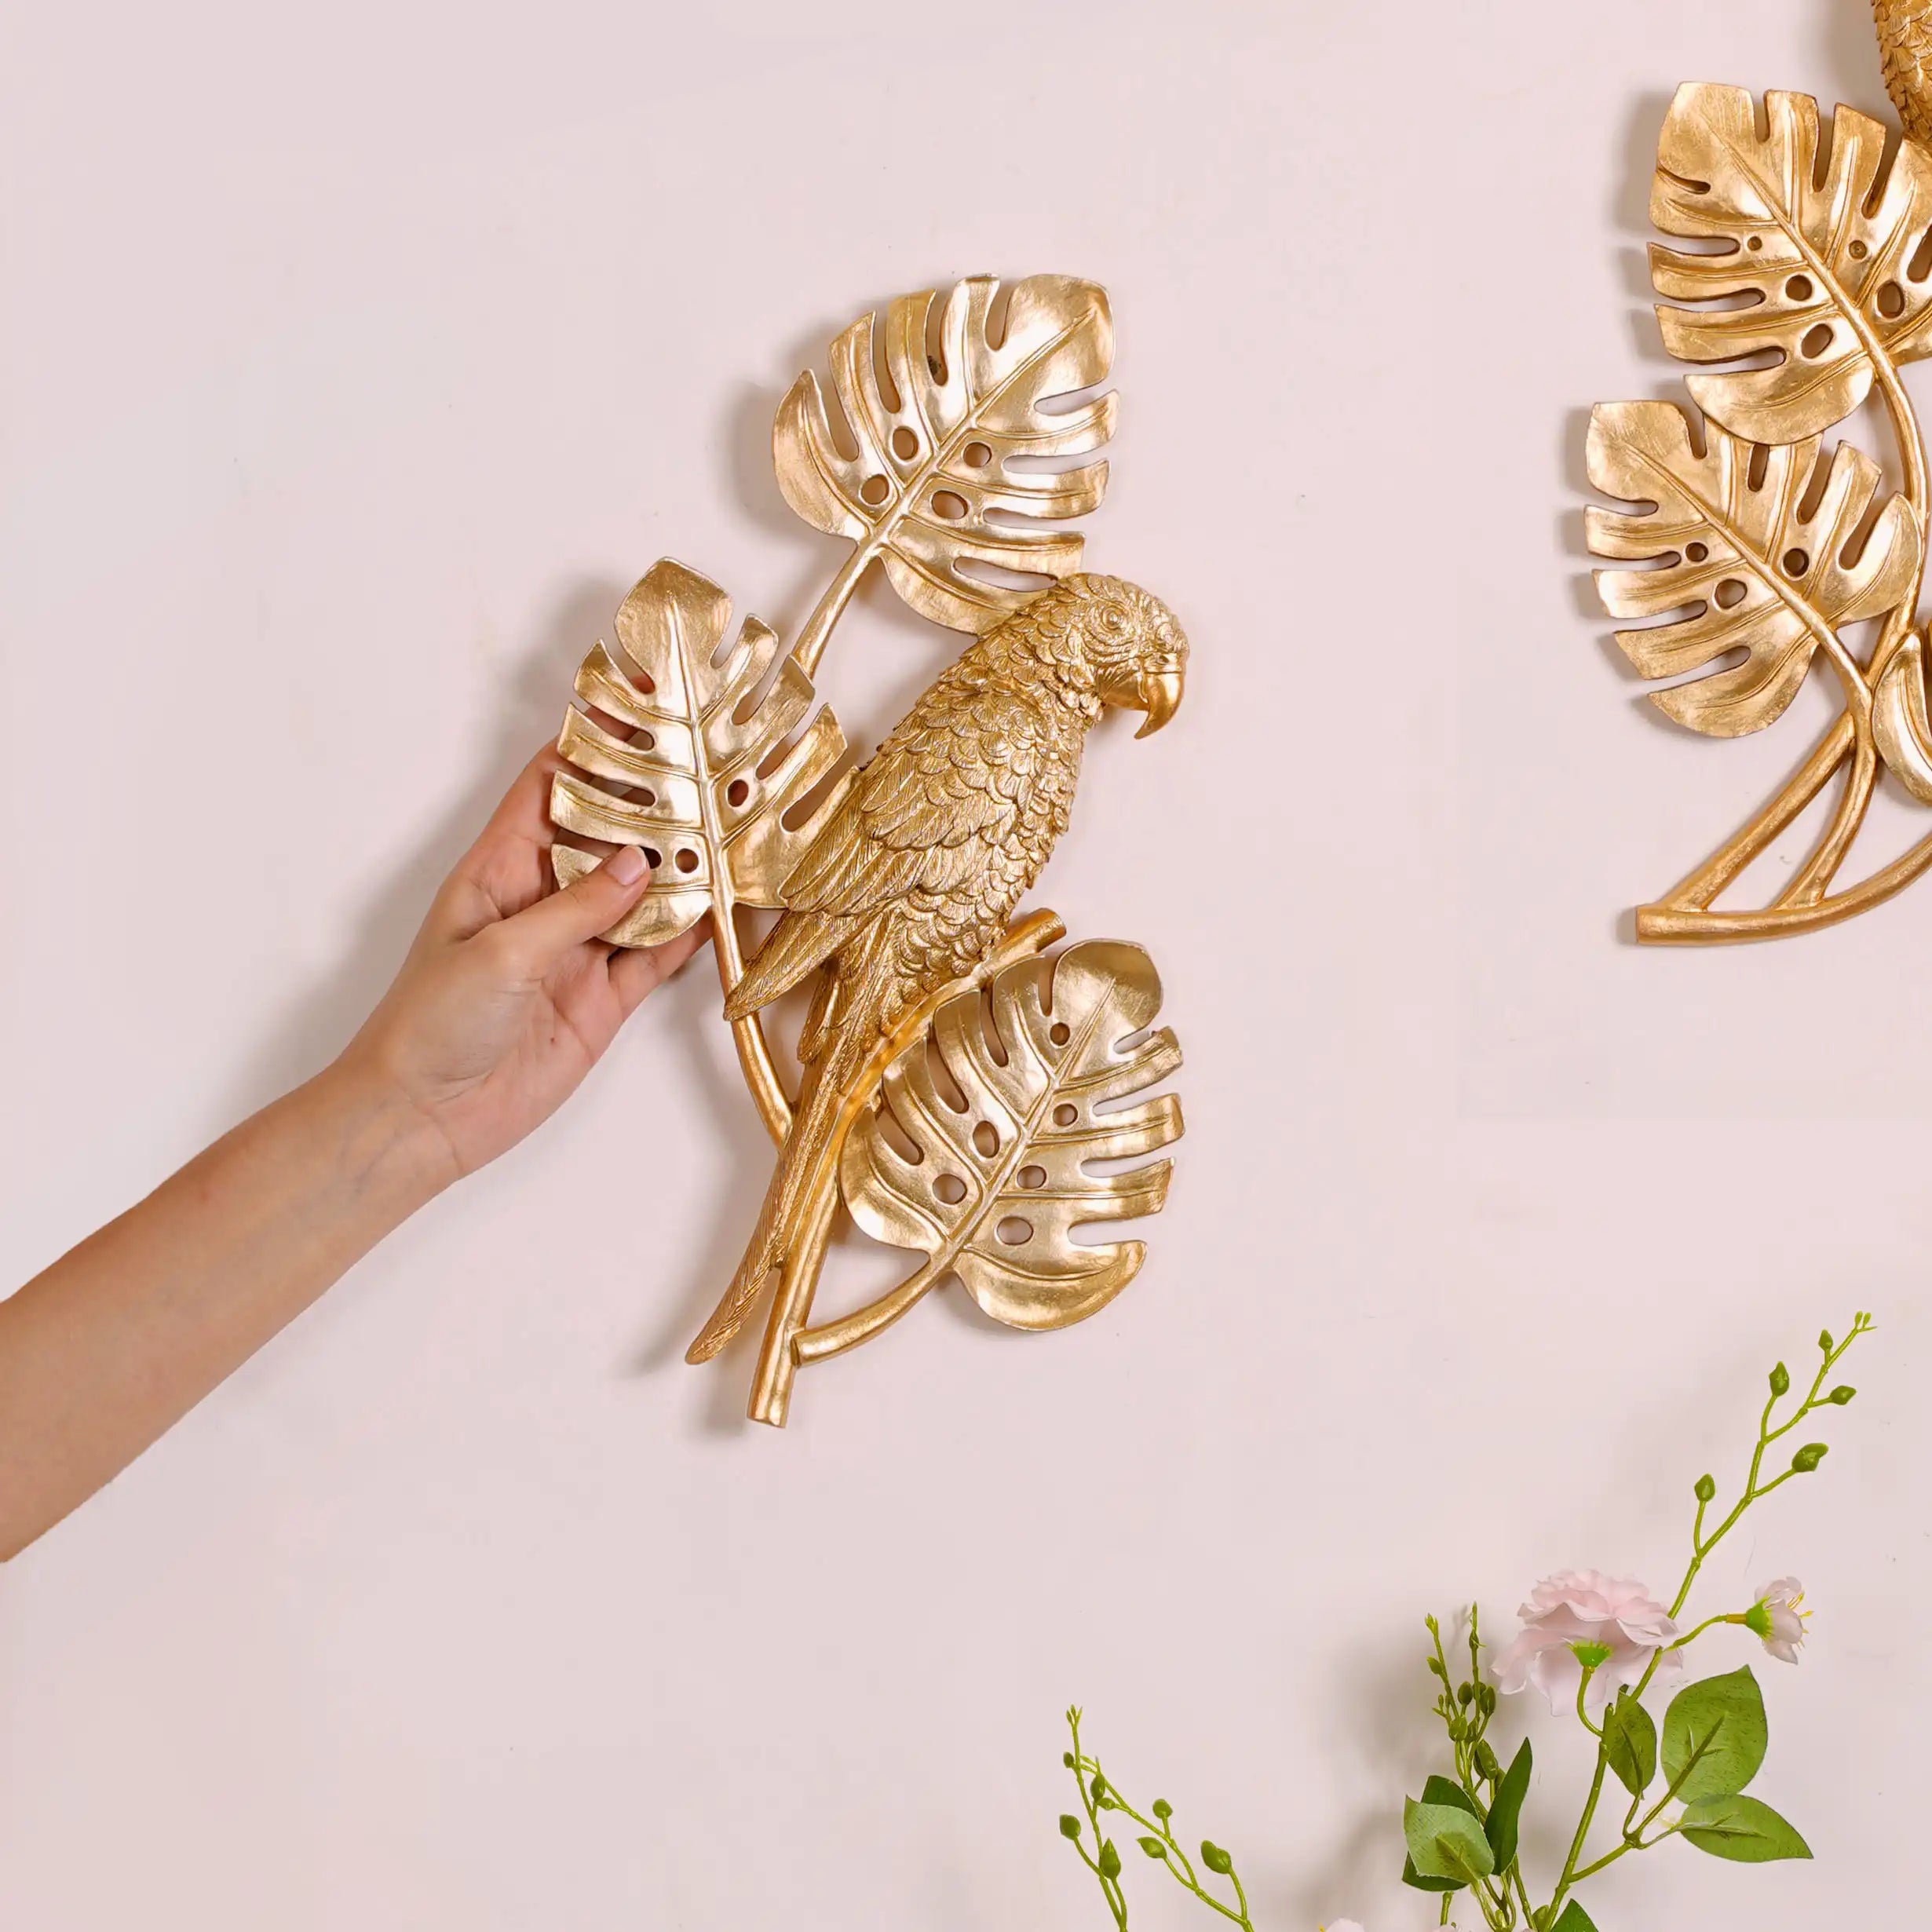 Wall Hanging - Buy Tropical Golden Wall Decor Online